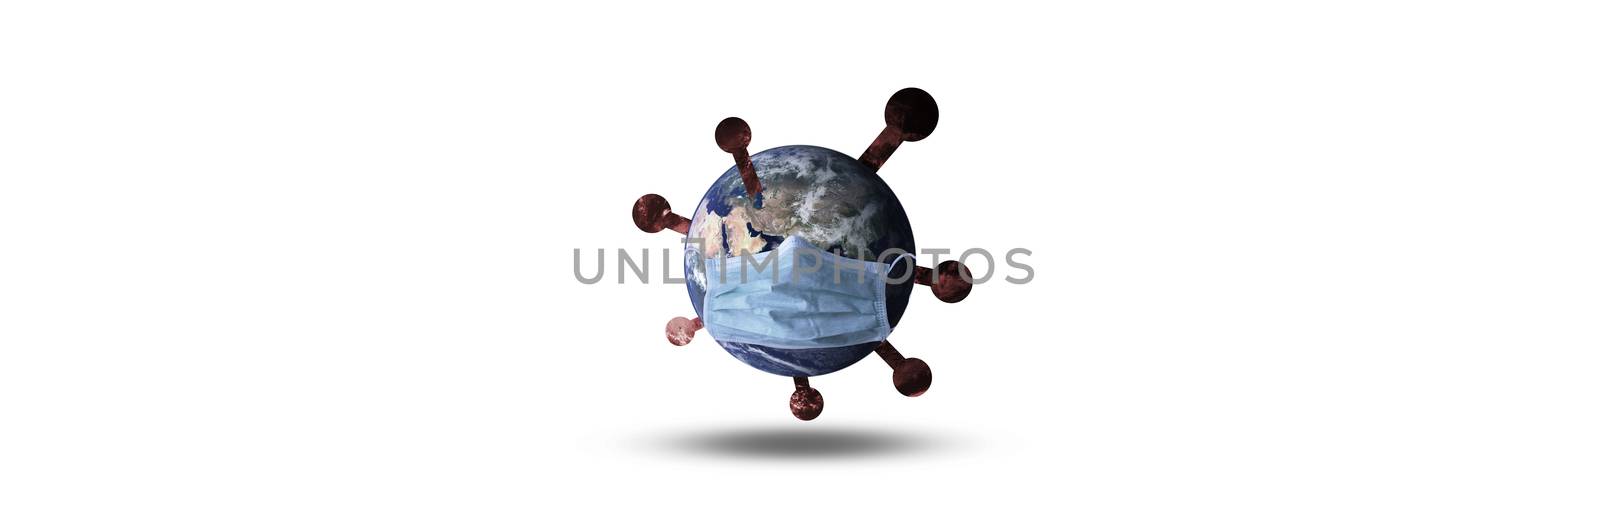 Panoramic World mask protect Corona virus on background with clipping path concept for Earth warning covid19 flu pandemic quarantine, wide environment day care for pneumonitis and symptoms control